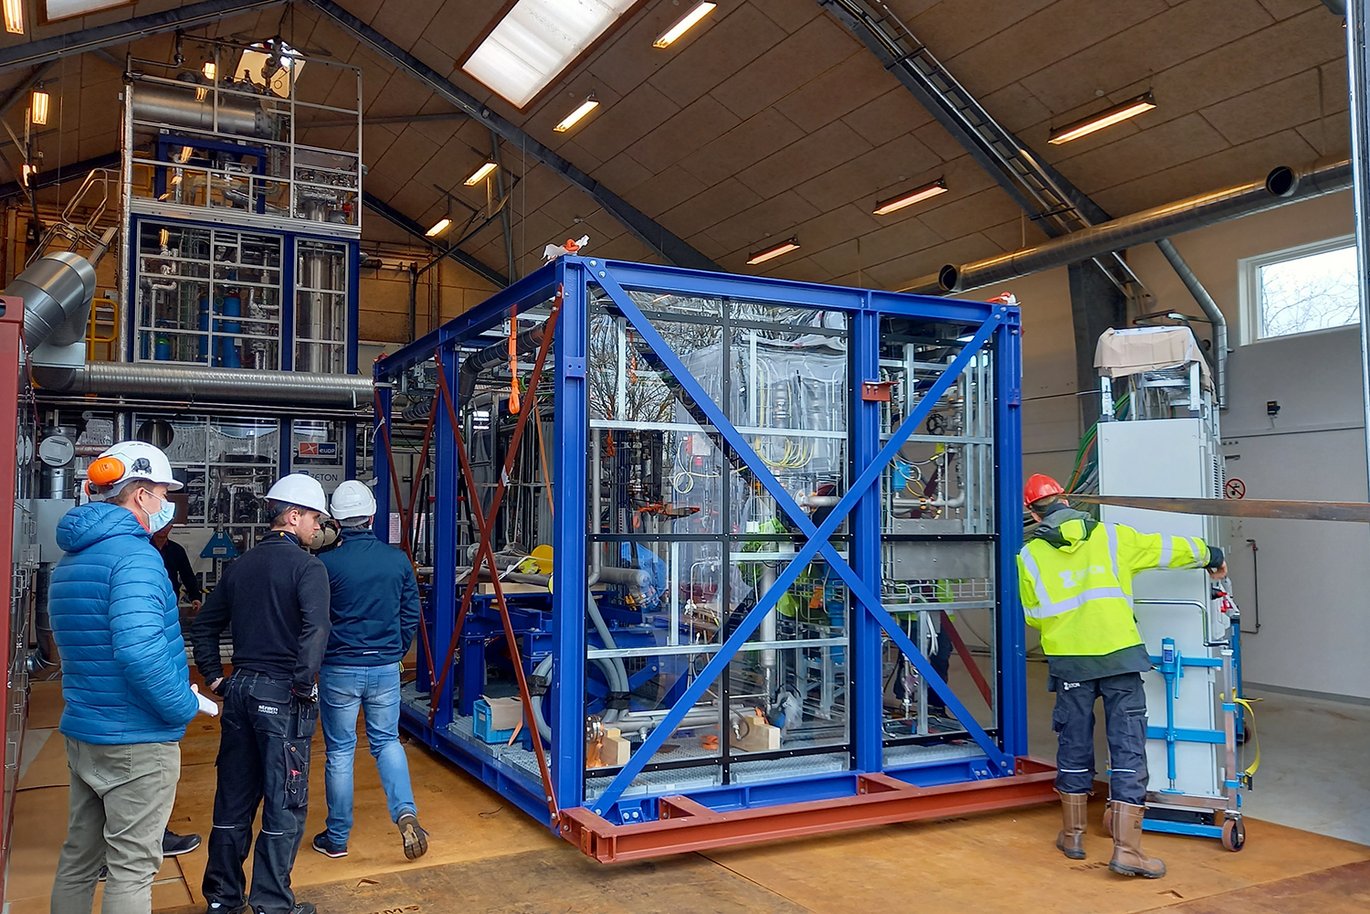 The demo facility being installed as part of Aarhus University's energy research facility in Foulum. Photo: Thomas Lundgaard.